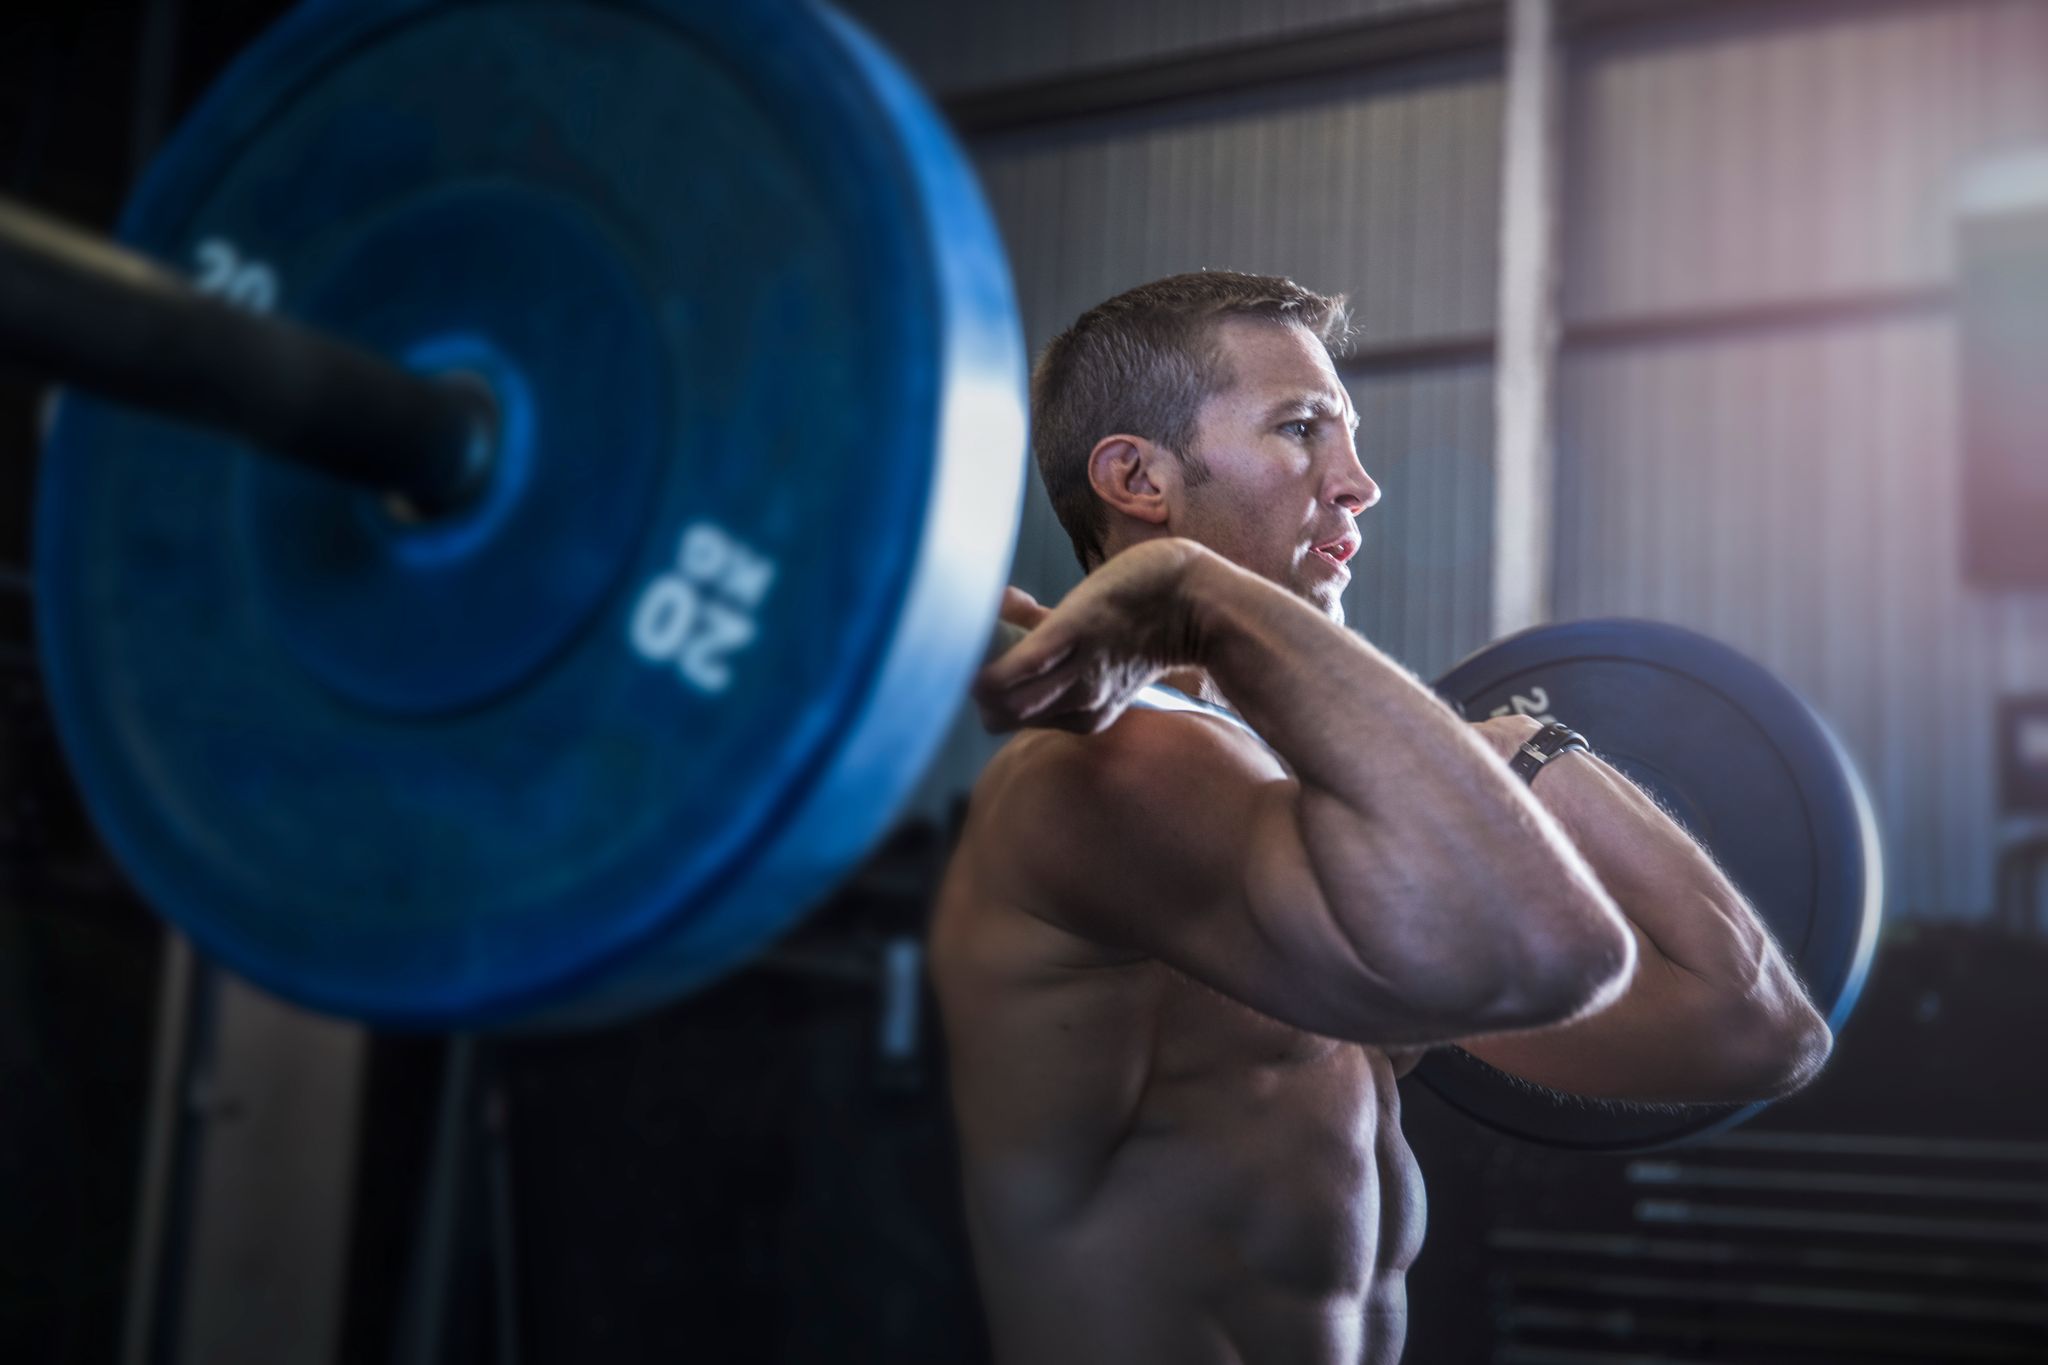 How to Perform a Perfect Hang Clean, What Muscles It Works and 5